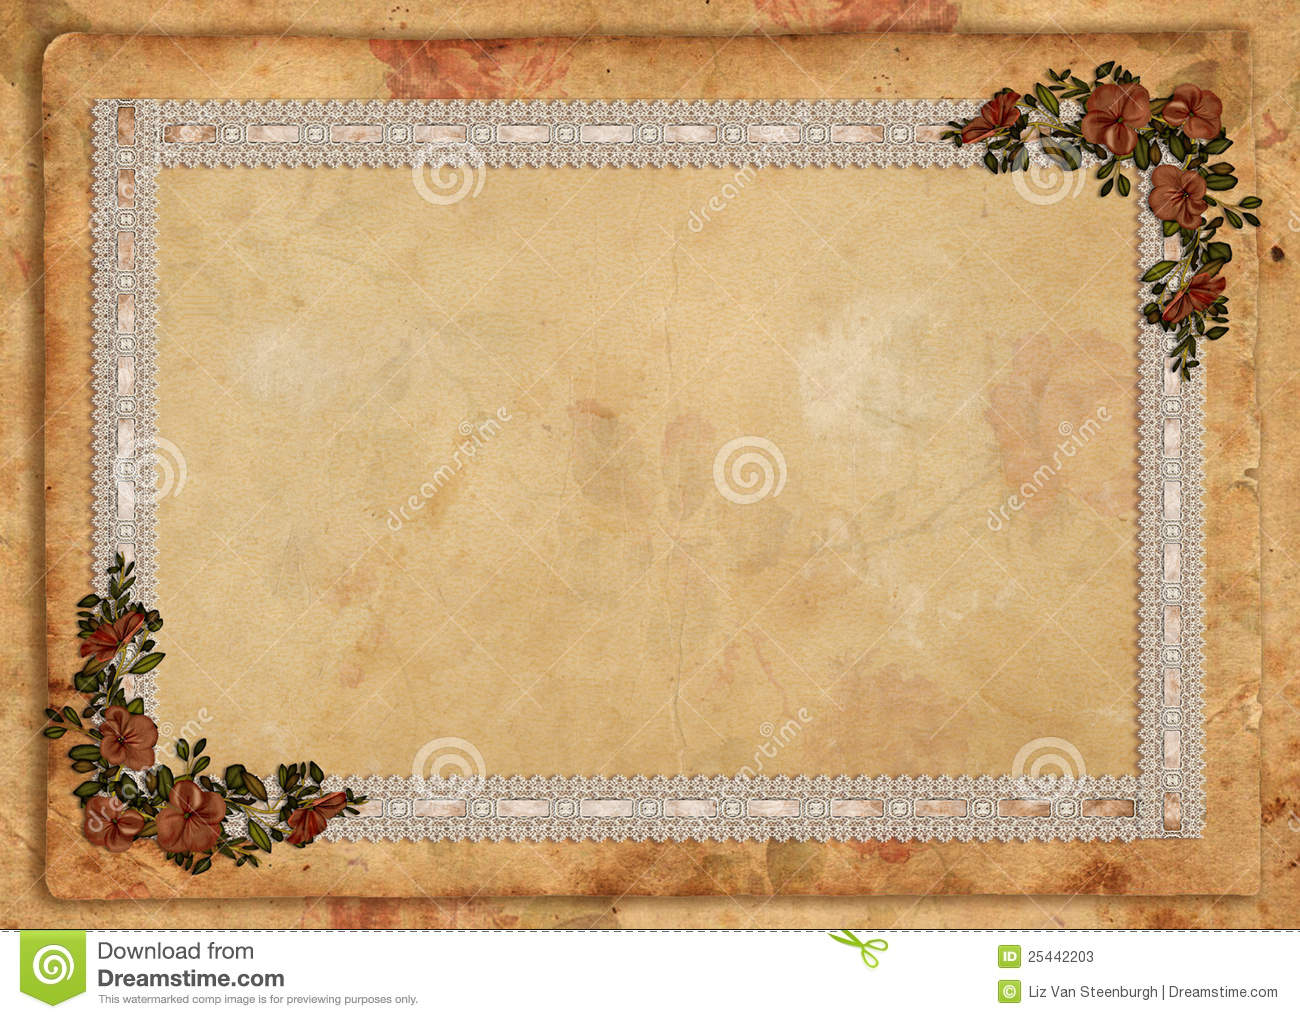 Floral Pattern Lace Border And Rust Colored Corner Floral Accents